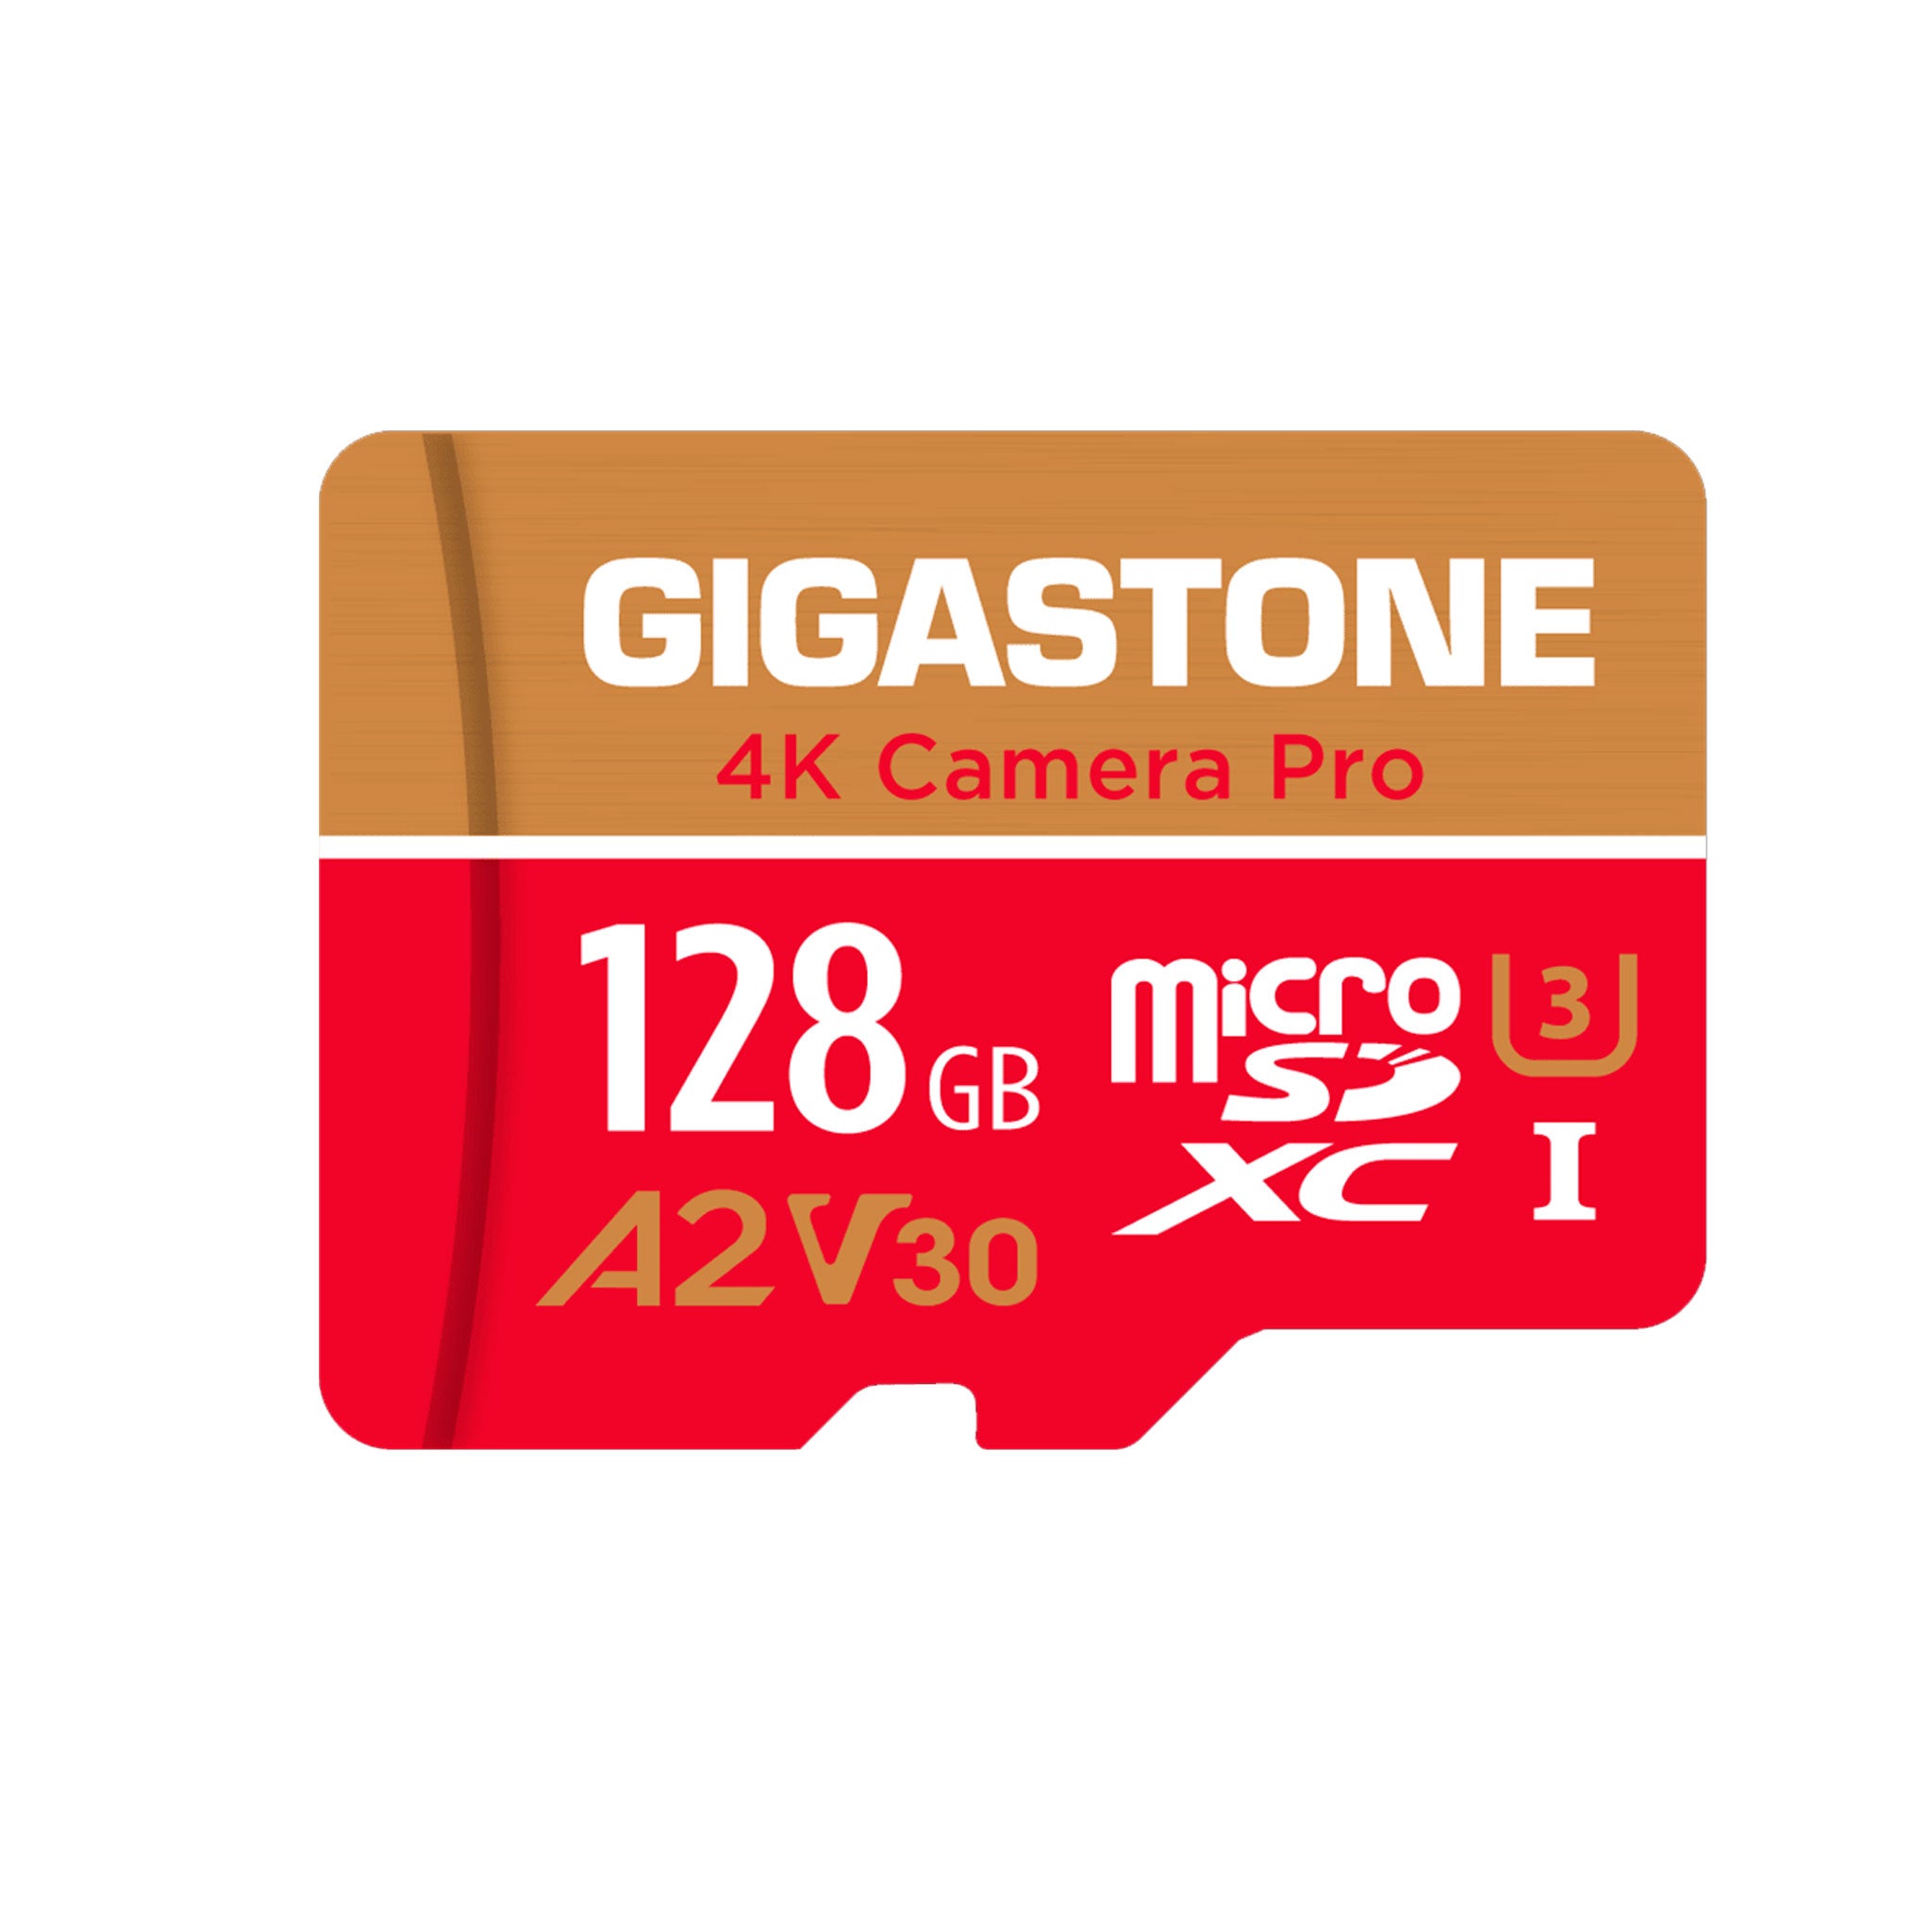 Gigastone - Microsd A1 V30 Memory Card 128gb - Red And Gold